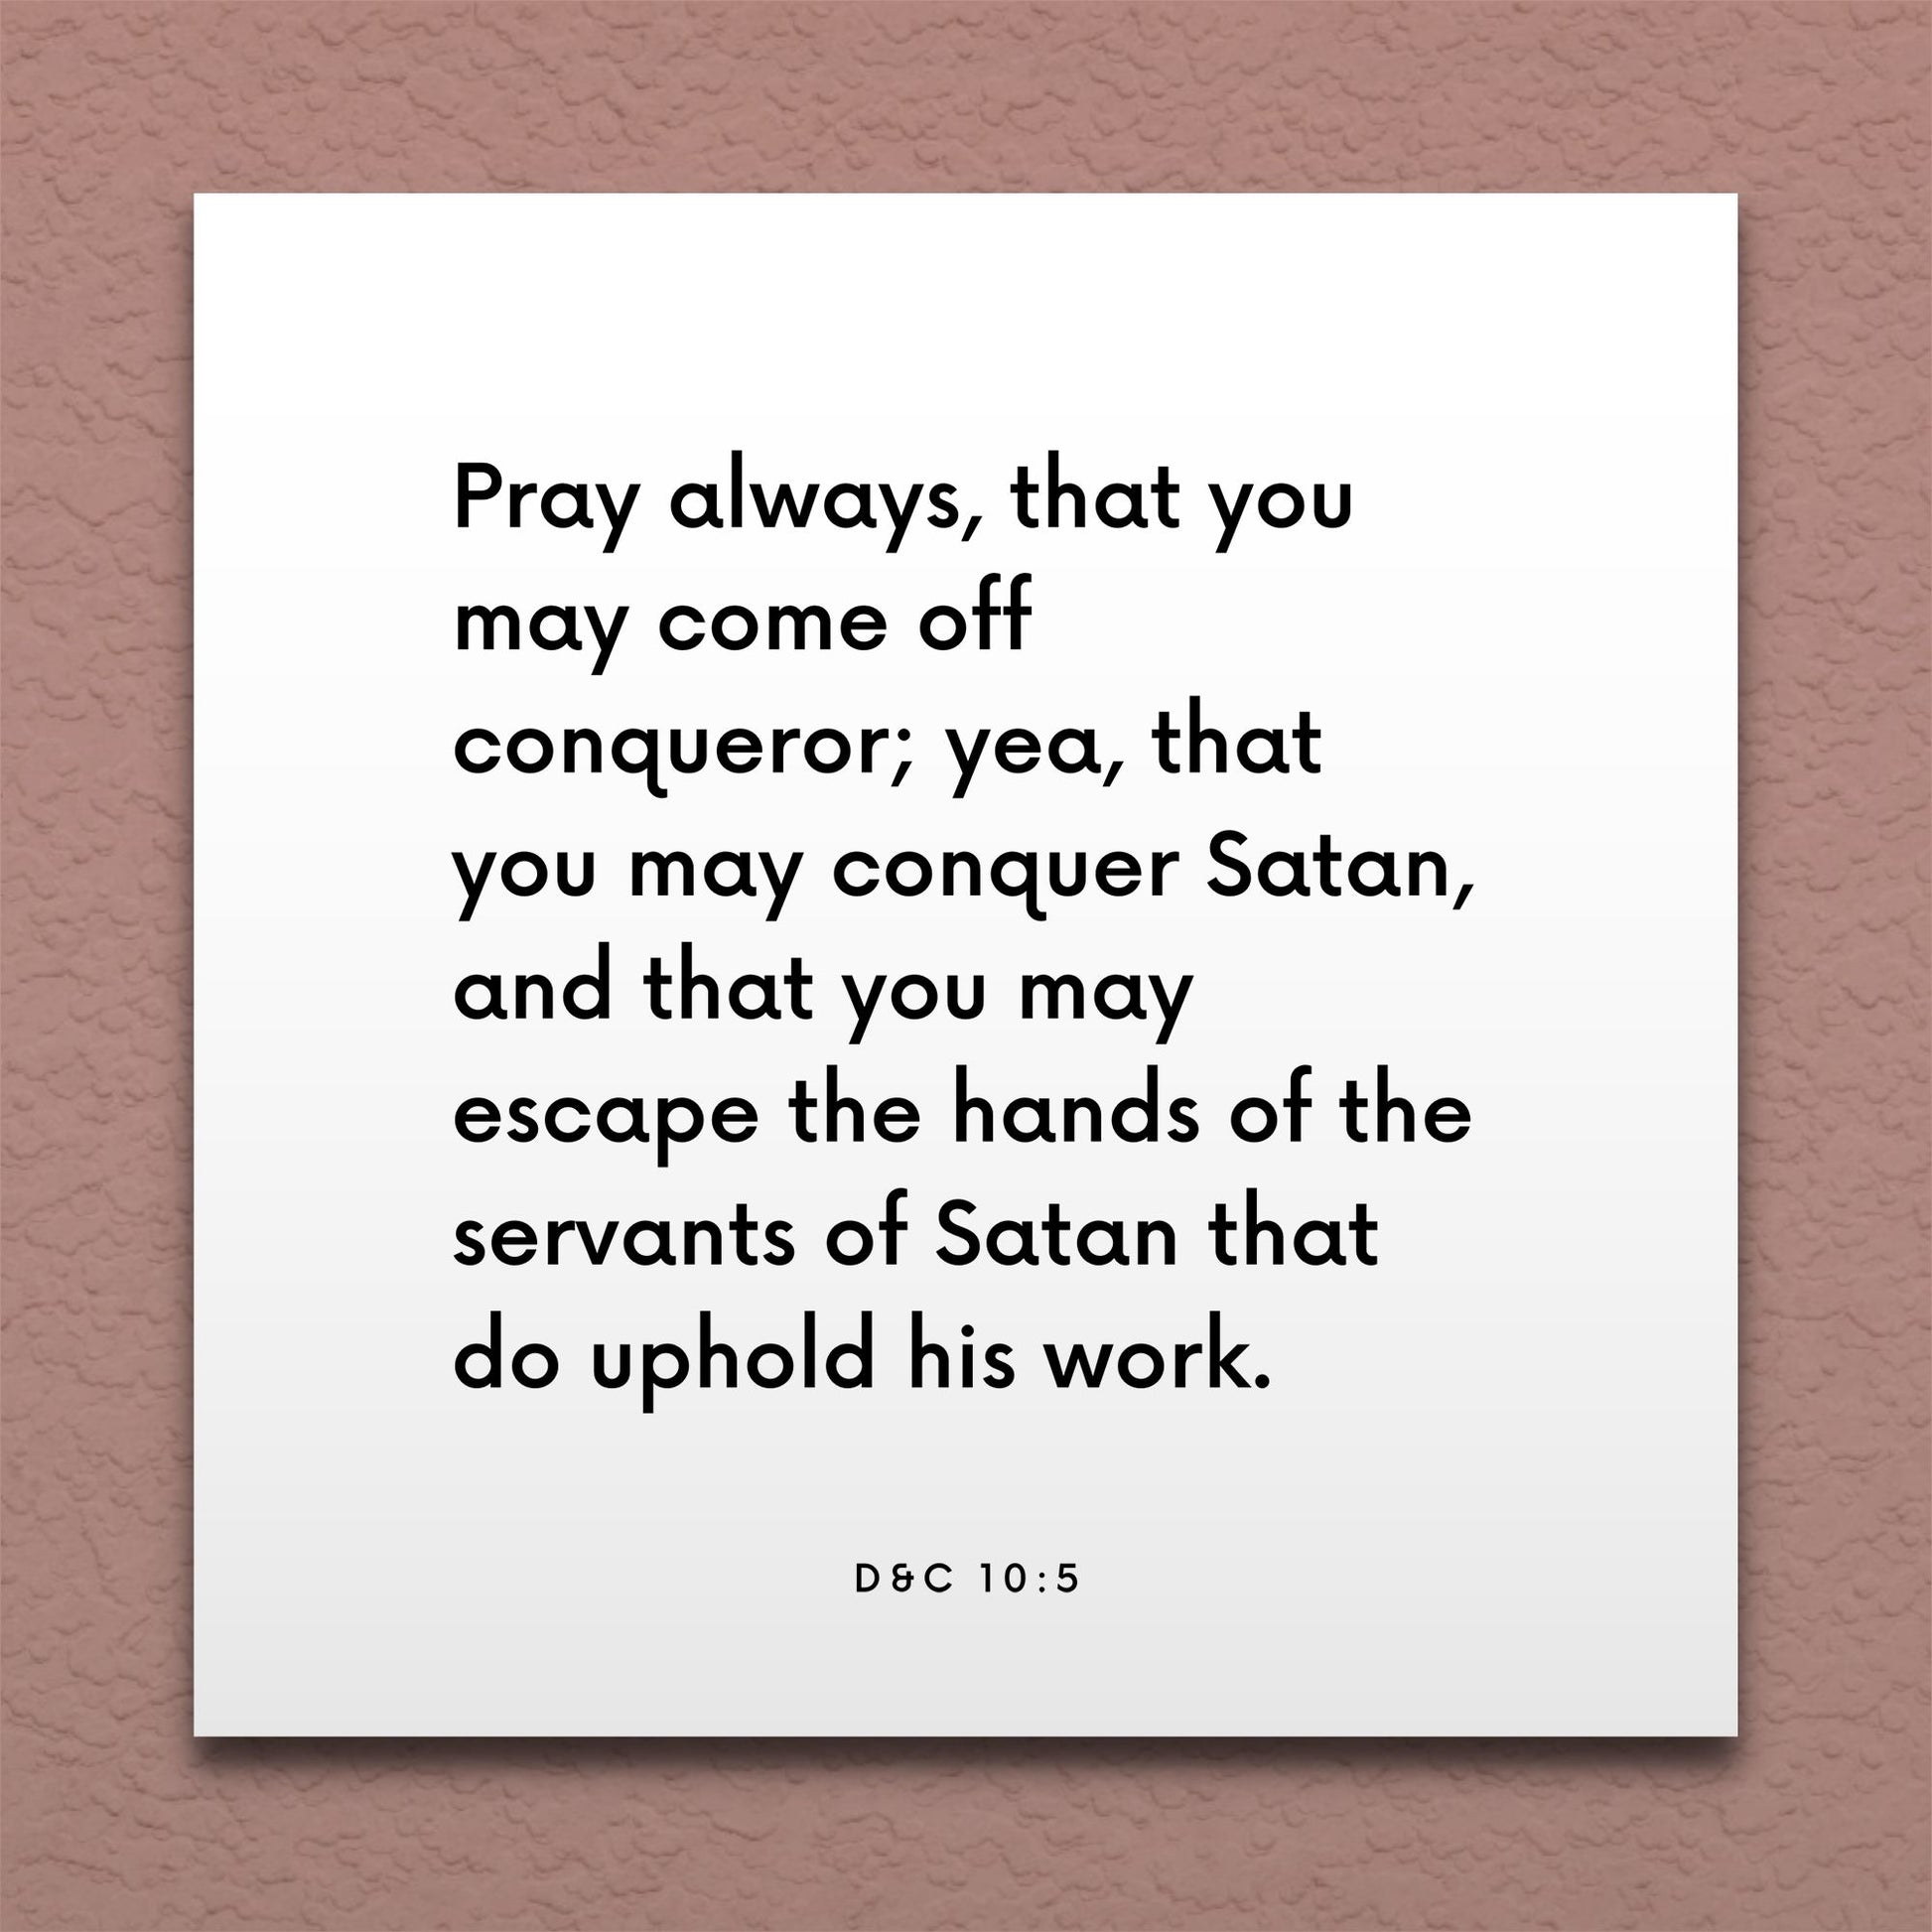 Wall-mounted scripture tile for D&C 10:5 - "Pray always, that you may come off conqueror"